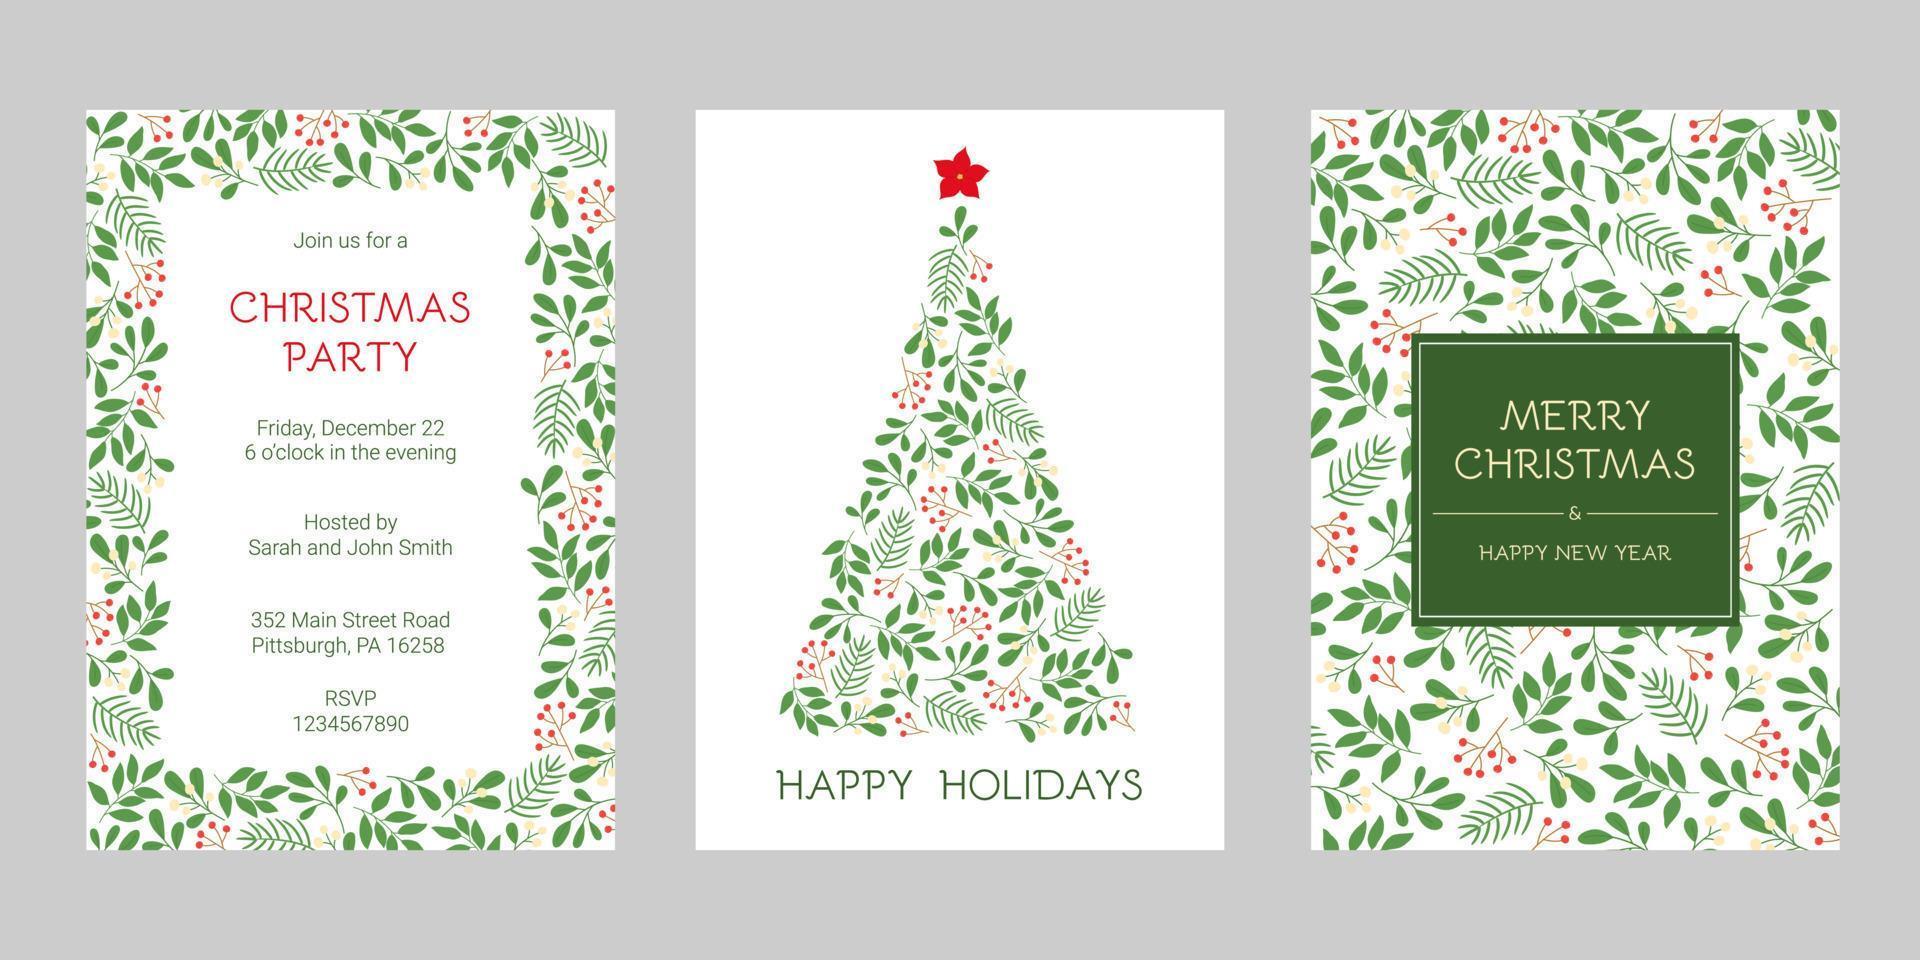 Set of holidays greeting cards with floral frames and Christmas ornament. Winter twigs patterns in green colors. vector